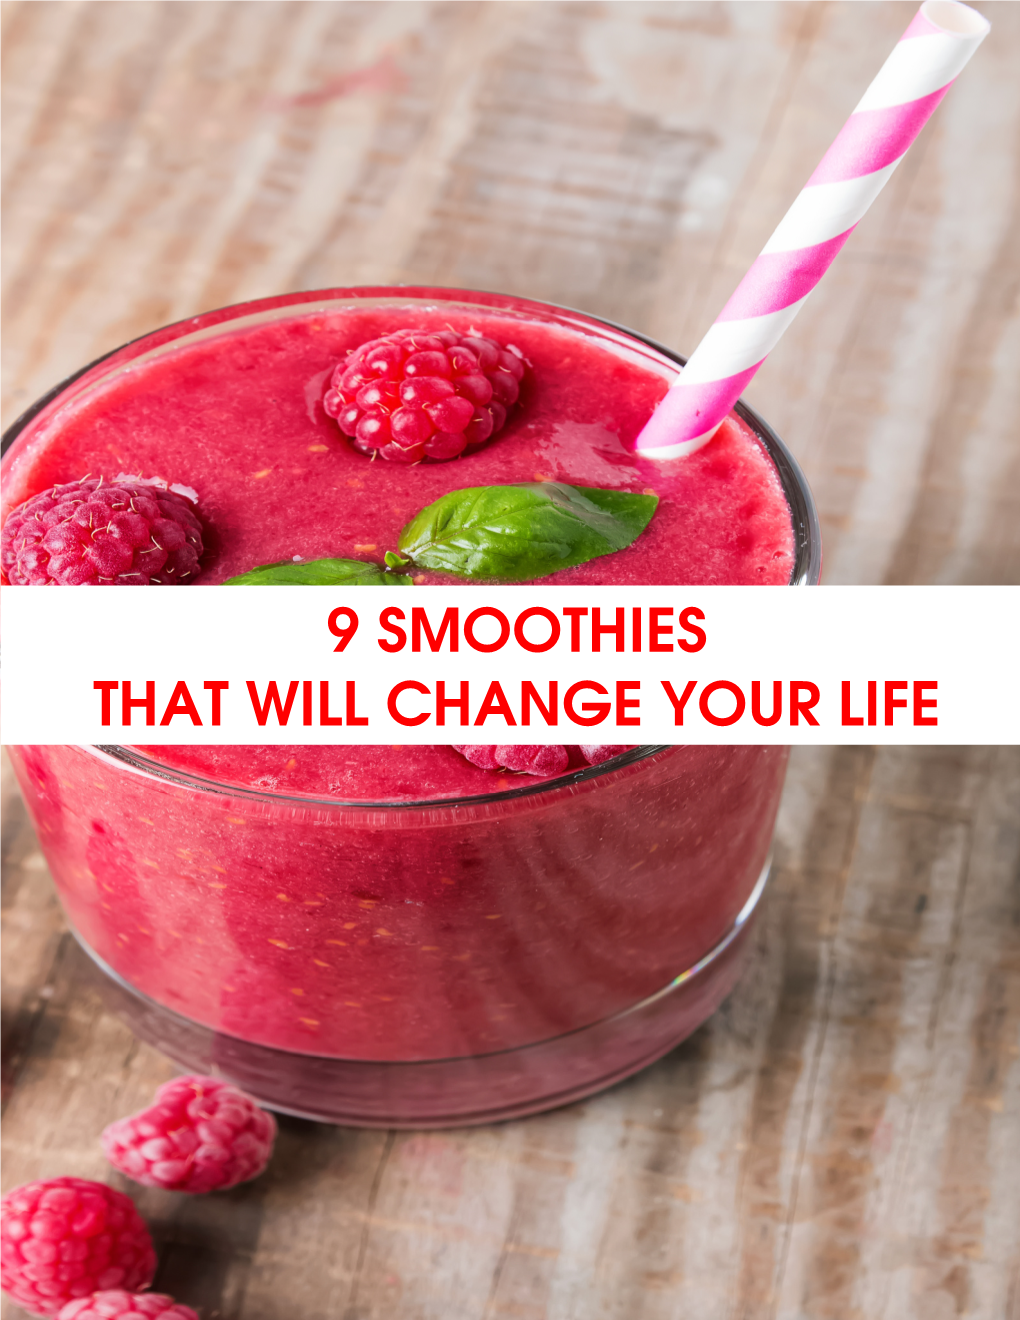 9 Smoothies That Will Change Your Life